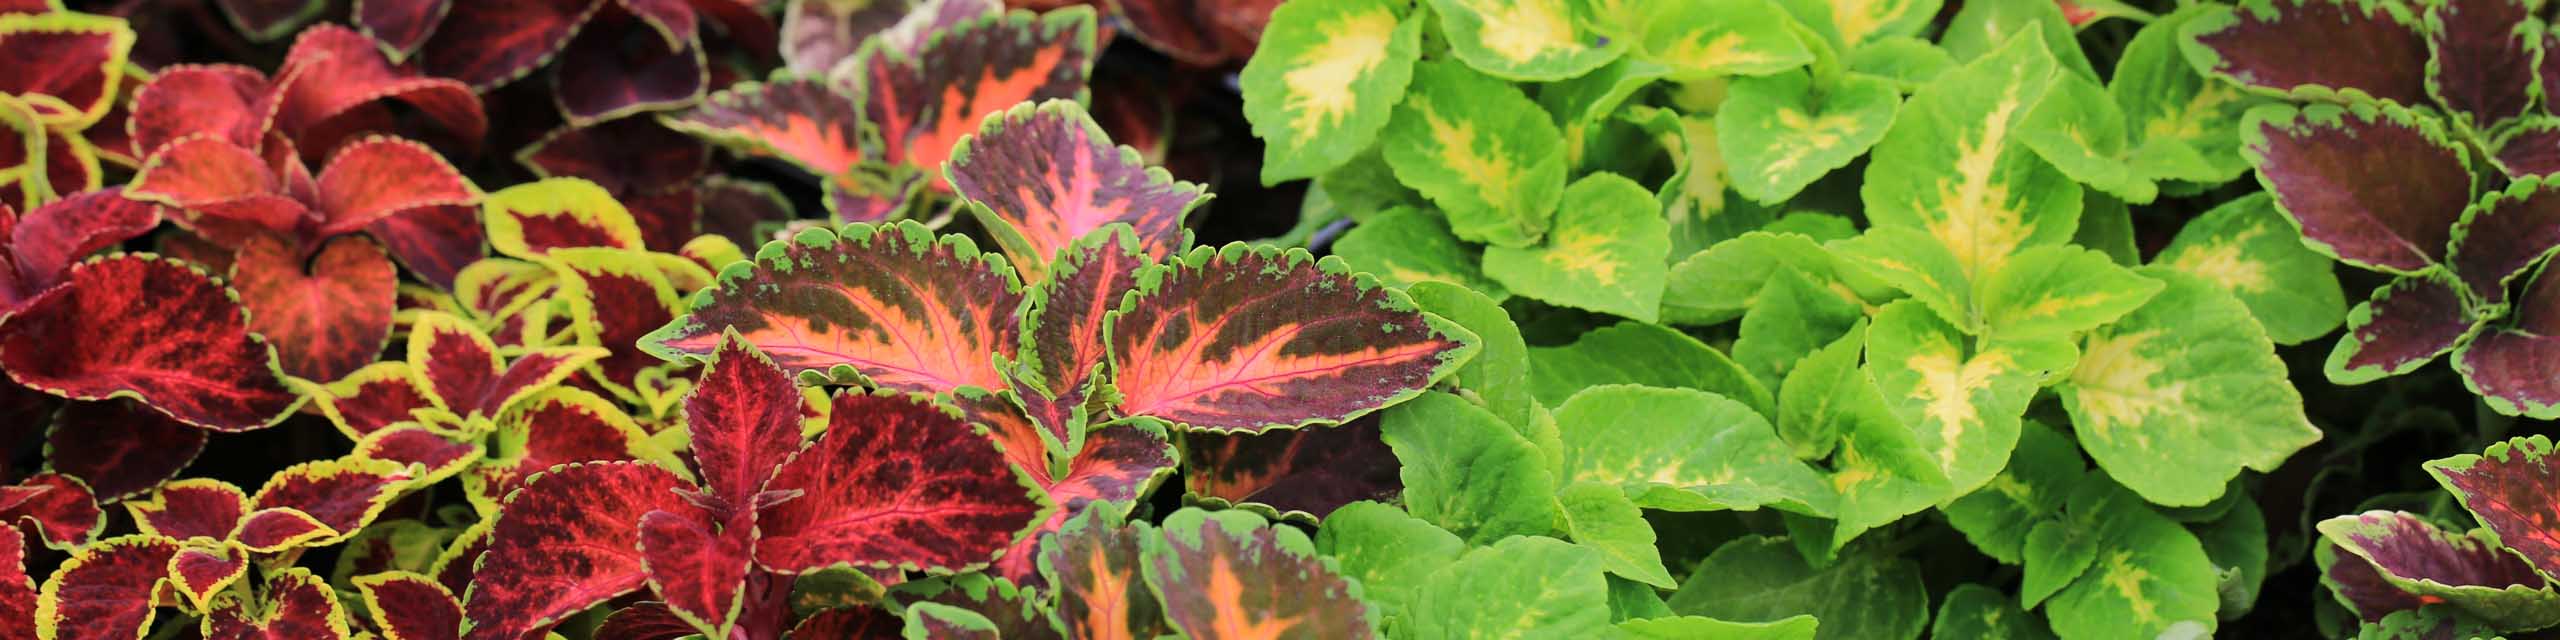 Different types and colors of coleus plants growing in a garden.